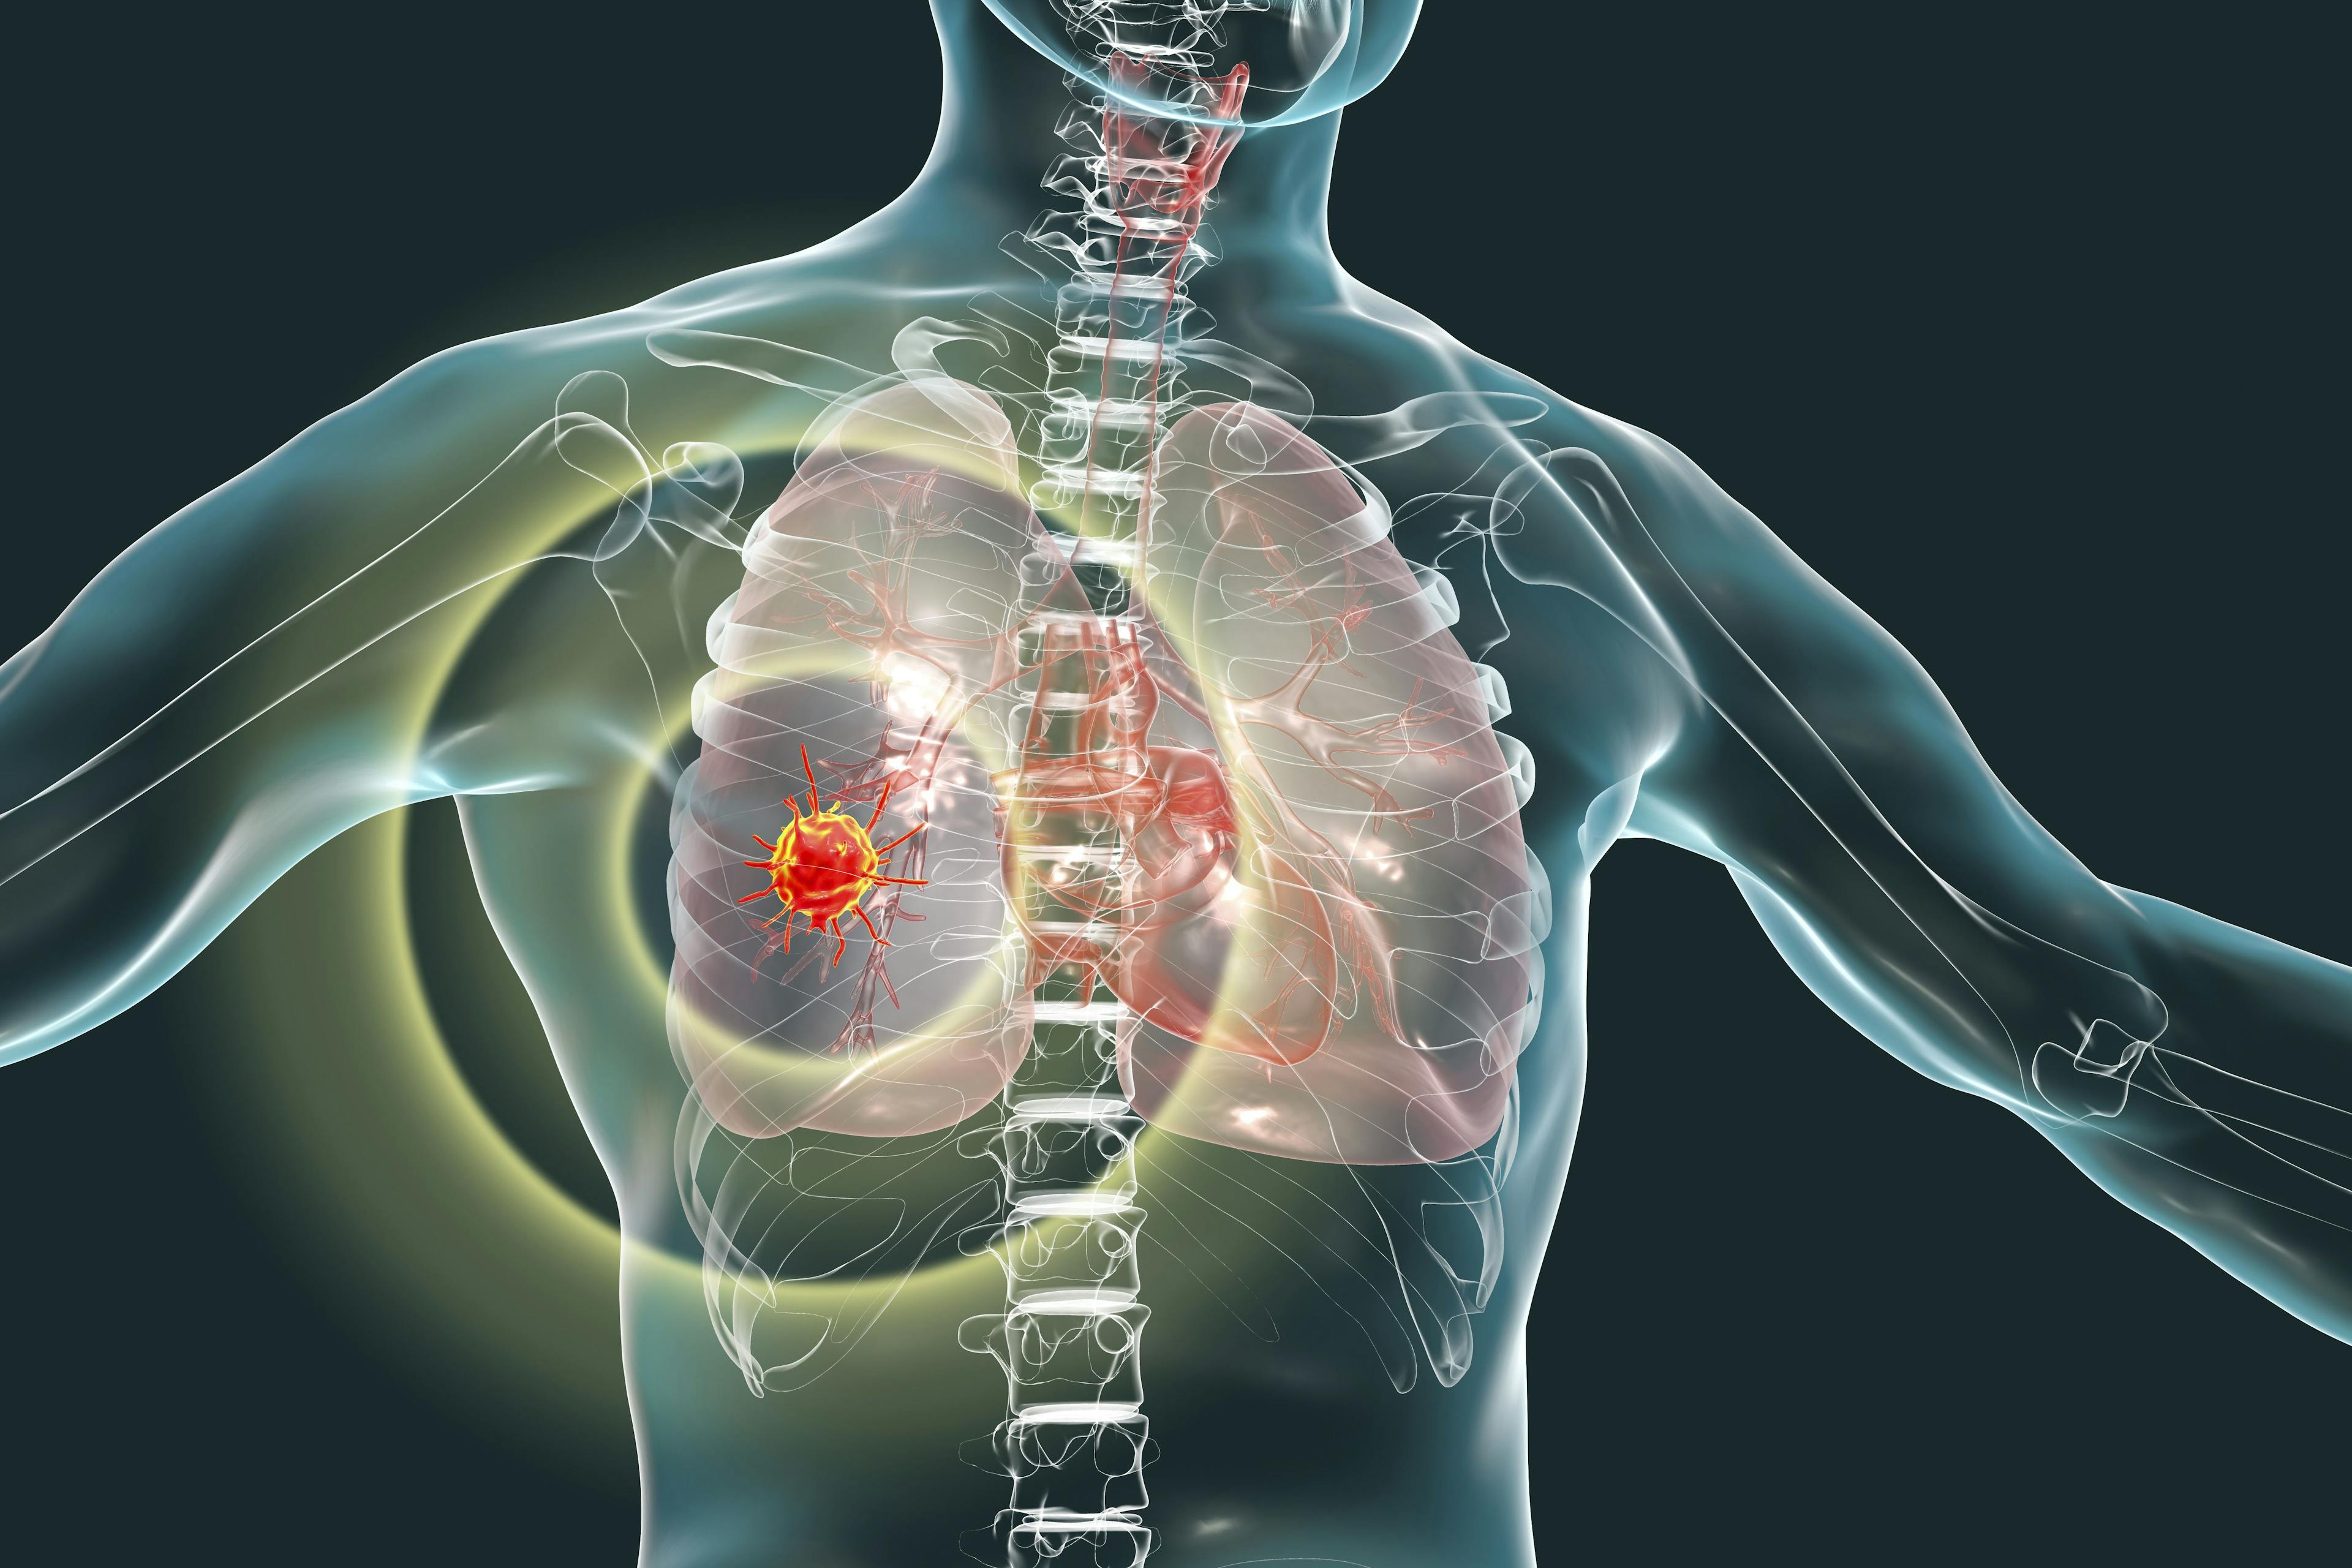 A proteogenomic analysis found savolitinib plus osimertinib elicited a response in patients with EGFR-mutated, MET-amplified advanced NSCLC.